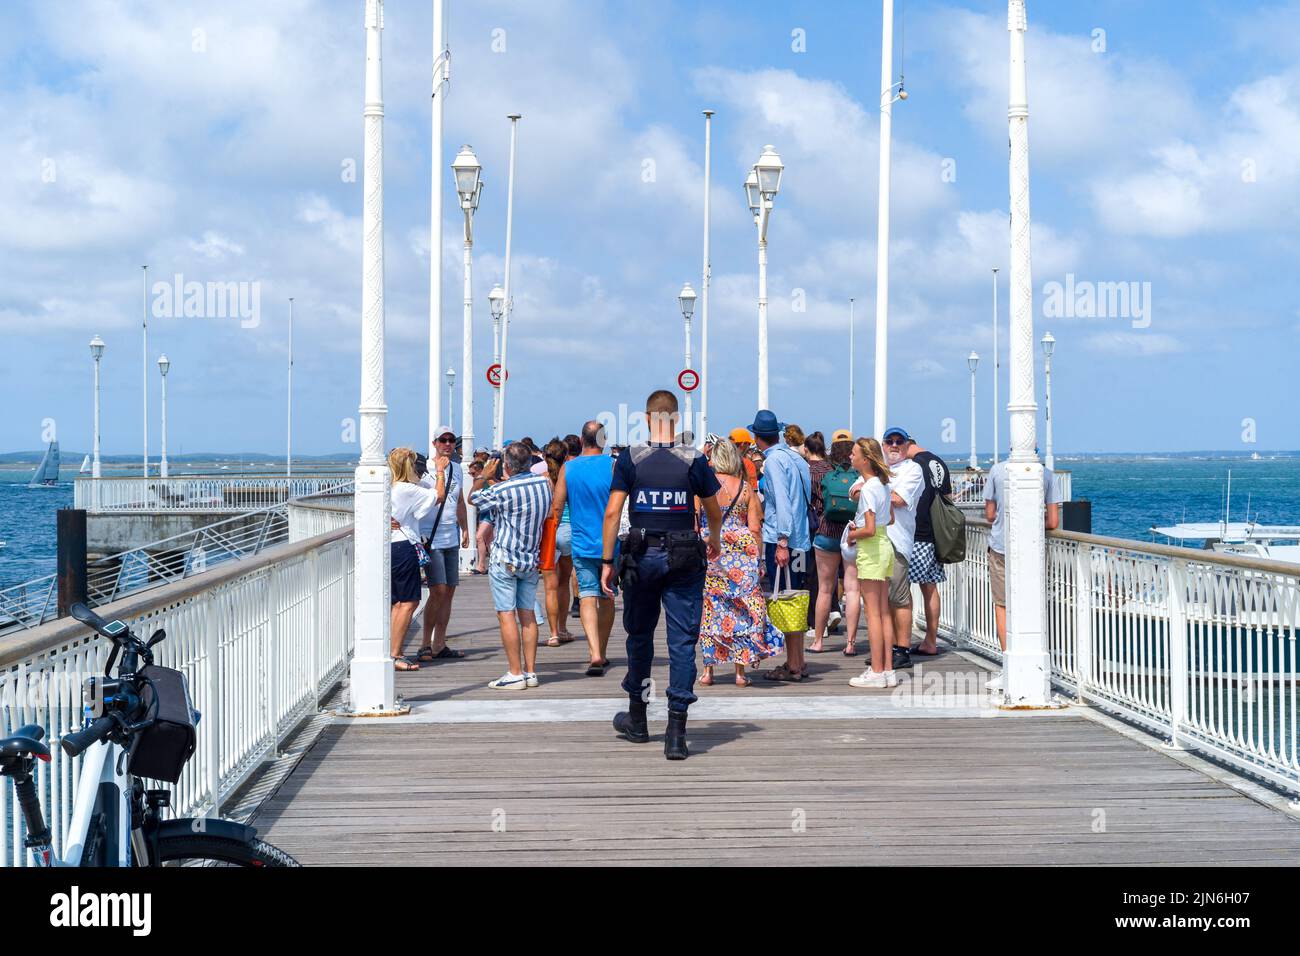 Boarding CAP FERRET, Jetee Belisaire, ABA, Union des bateliers Arcachonnais. Arcachon beach, the Belisaire pier, the embarkations, the lovers, the bathers, a day at the beach. August 04, 2022. Photo by Patricia Huchot-Boissier/ABACAPRESS.COM Stock Photo